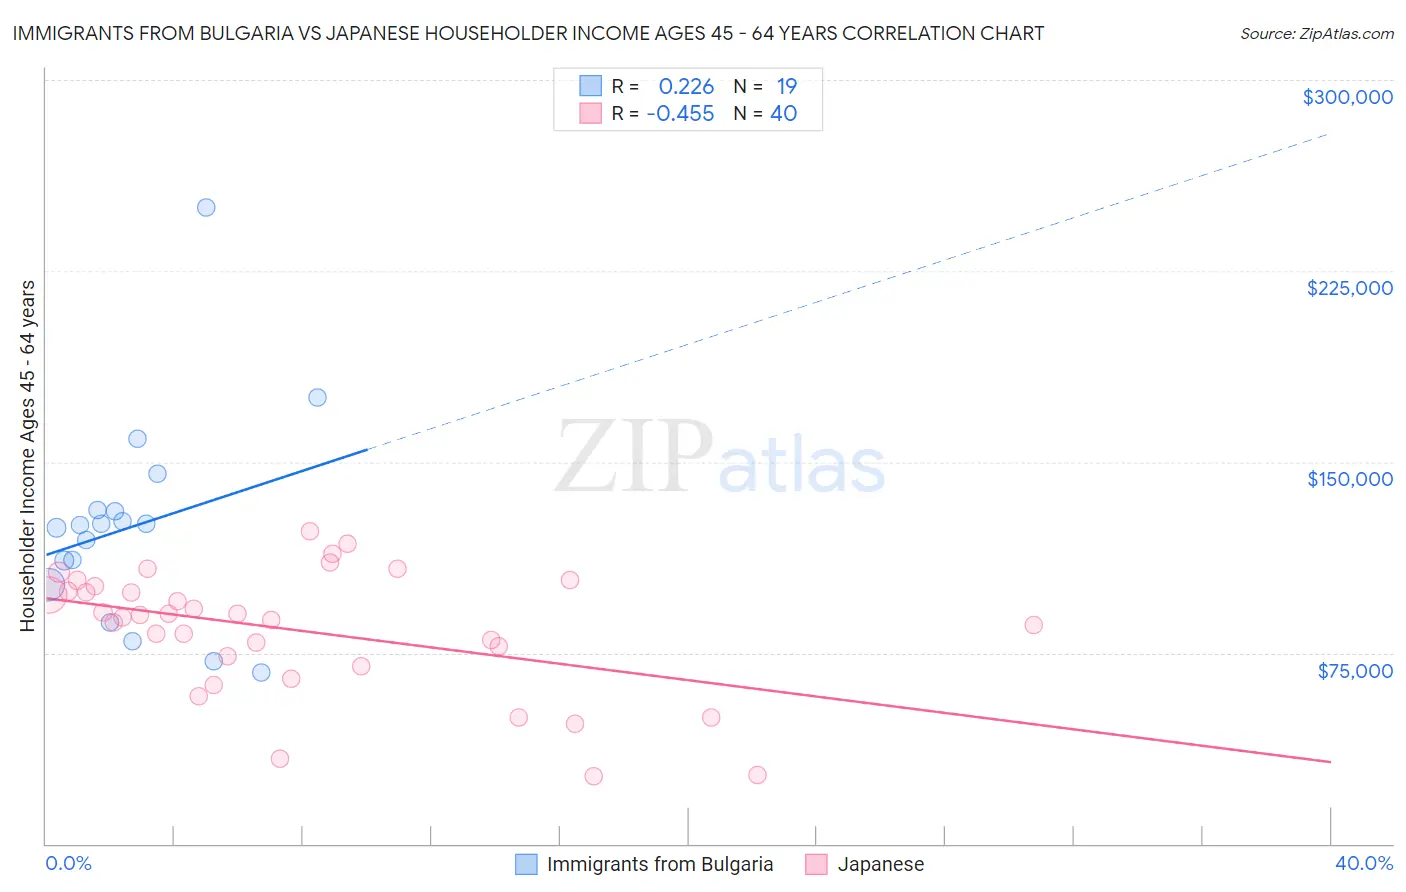 Immigrants from Bulgaria vs Japanese Householder Income Ages 45 - 64 years